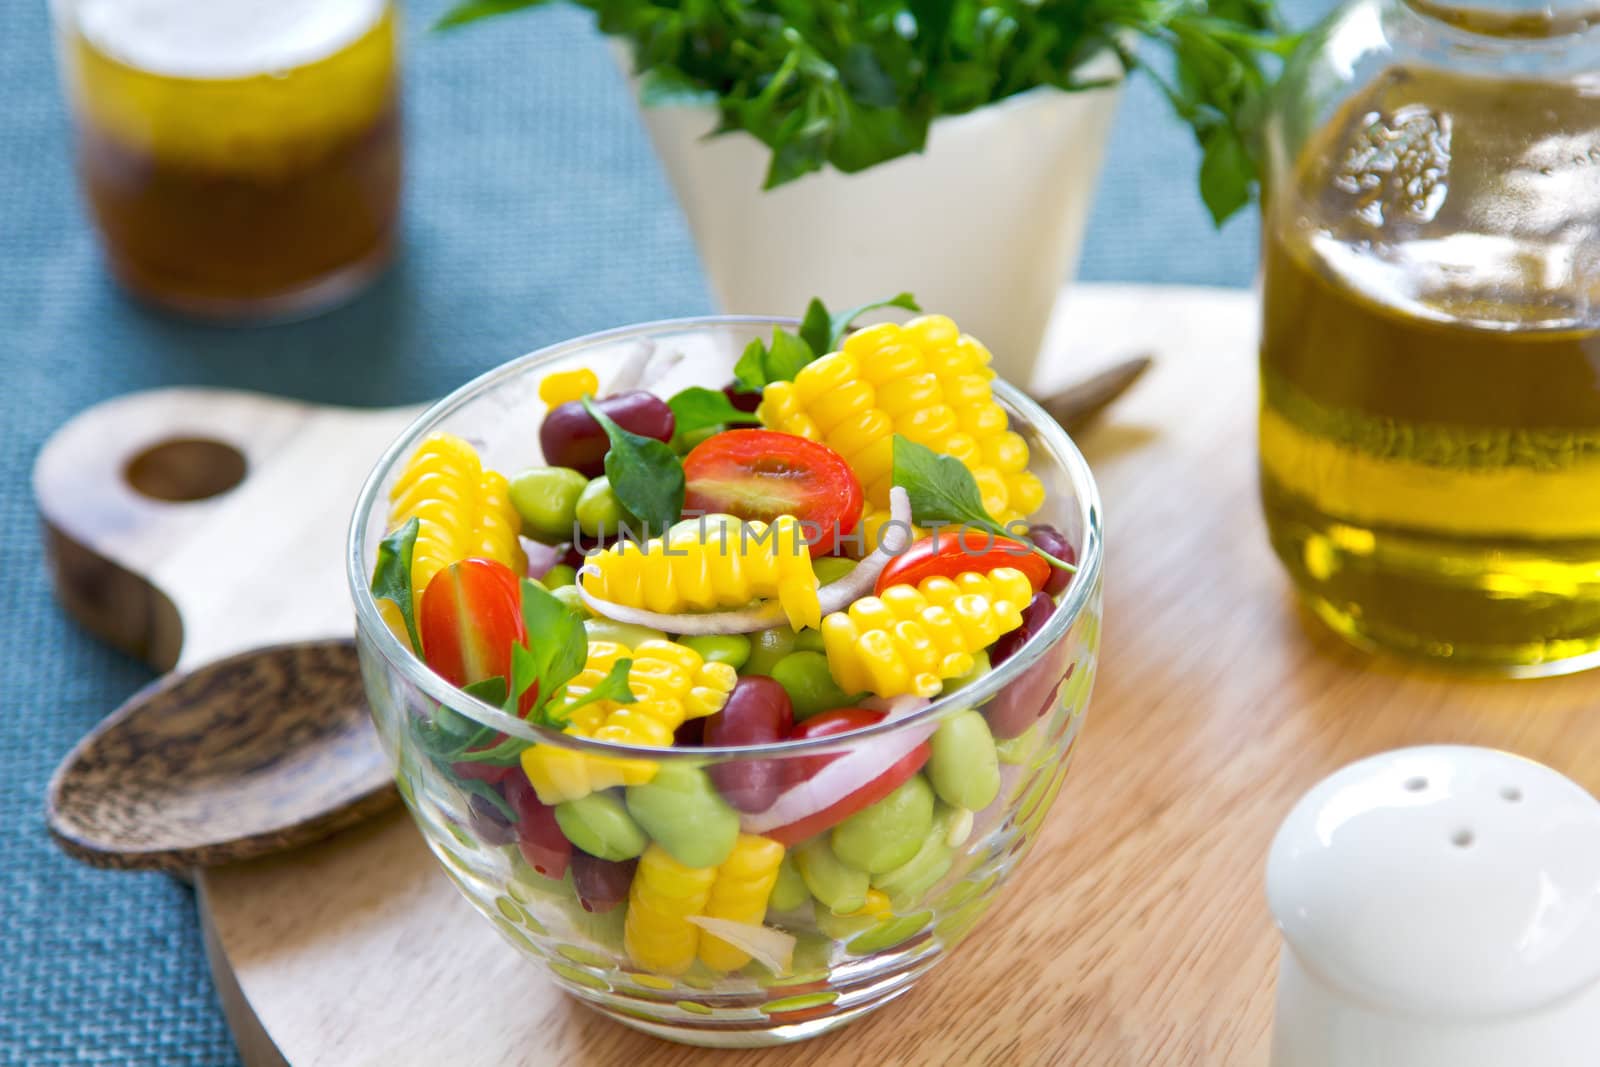 Beans and Corn salad by vanillaechoes